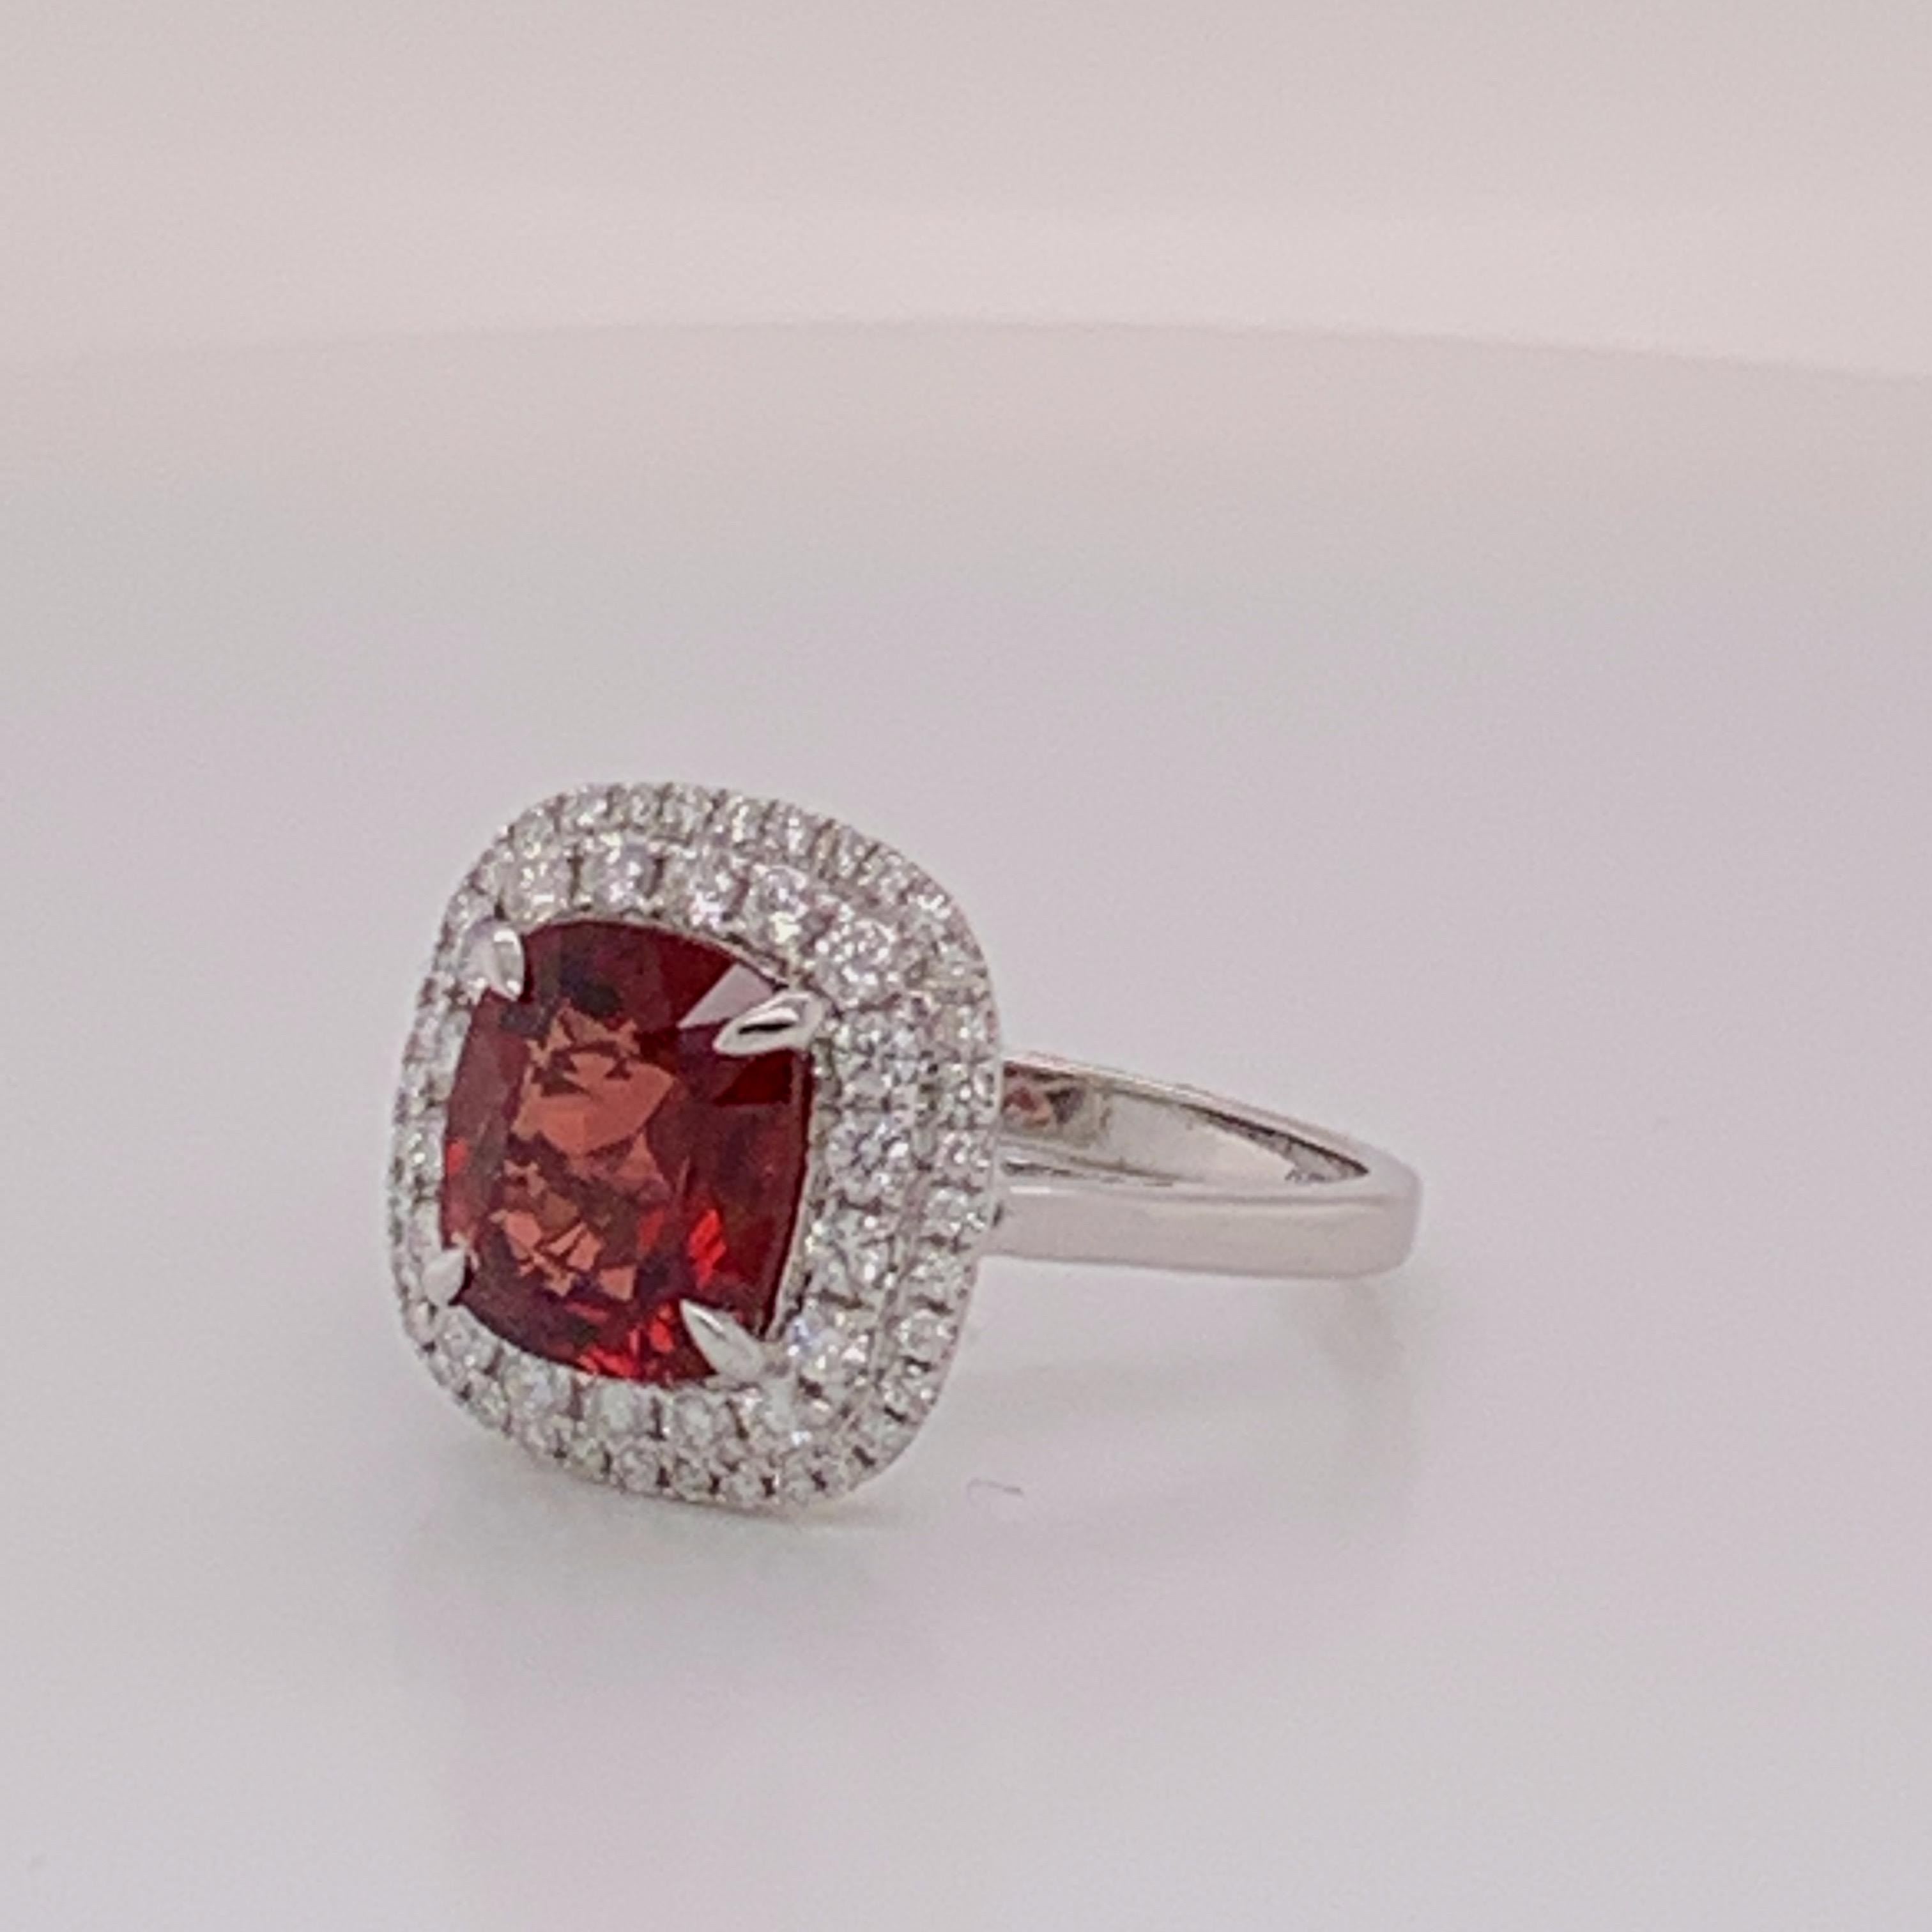 Women's Red Spinal and White Diamond Ring